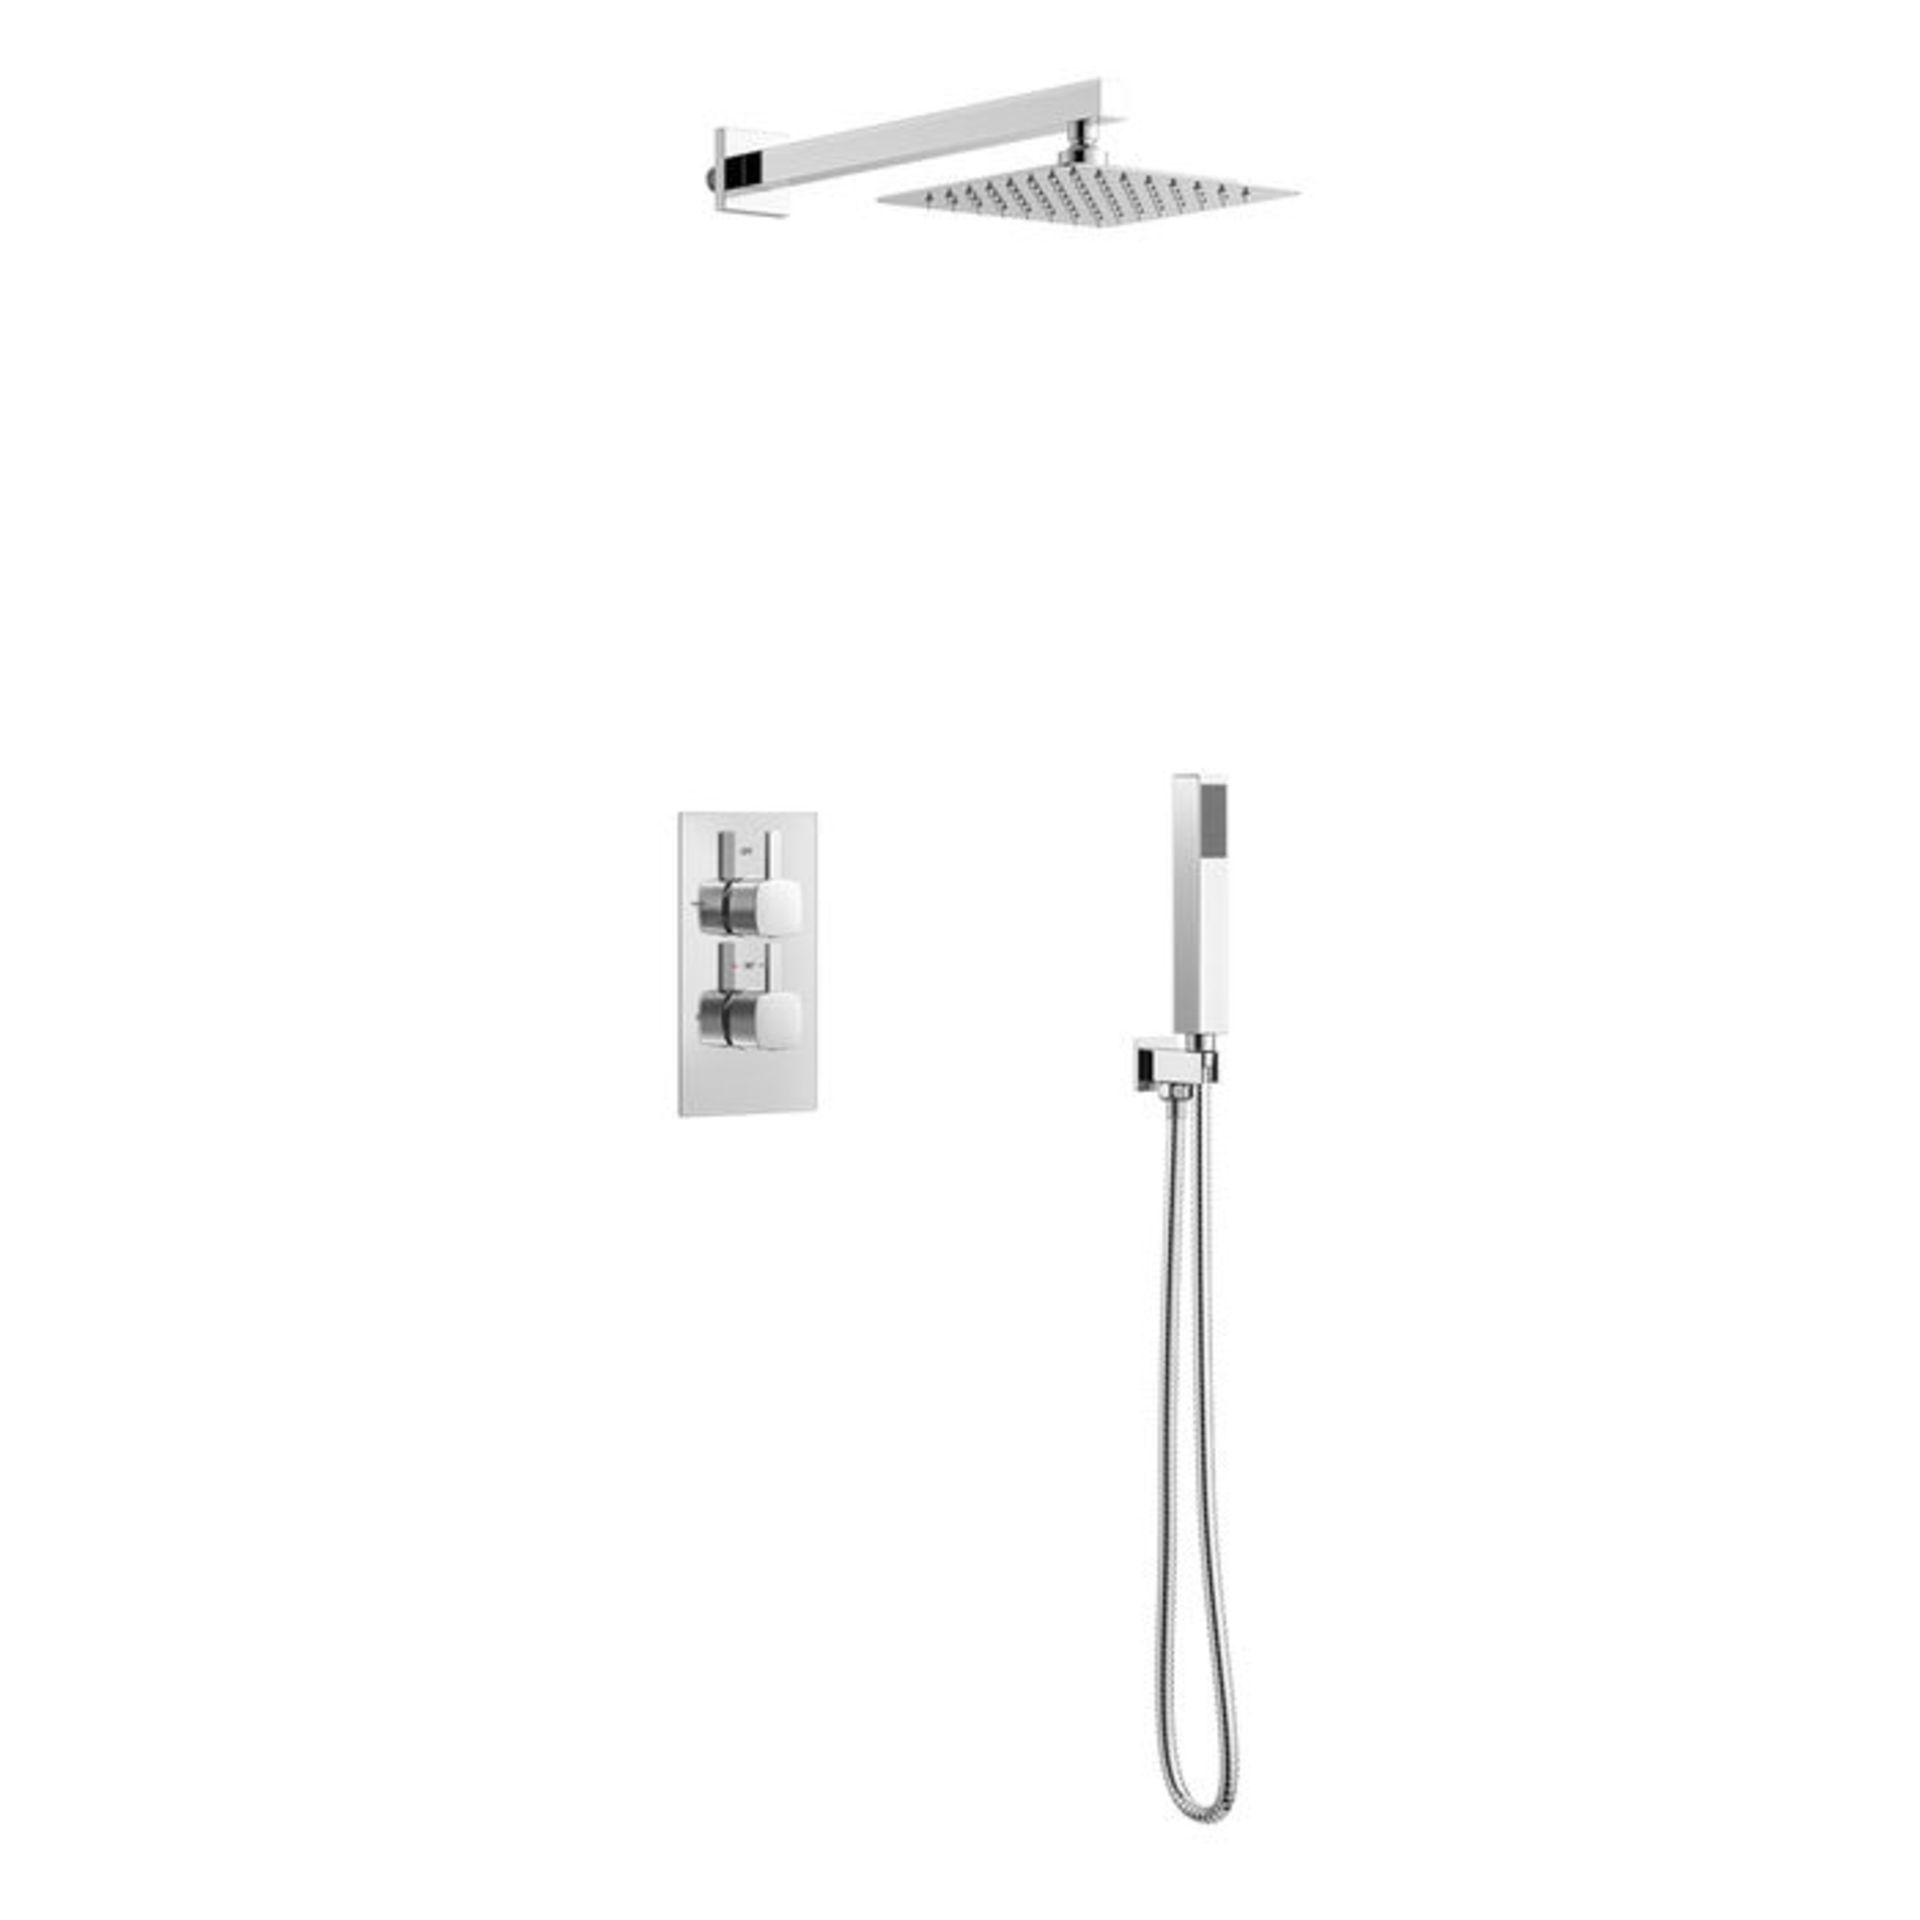 (YC33) Square Concealed Thermostatic Mixer Shower Kit & Medium Head. Family friendly detachable hand - Image 3 of 4